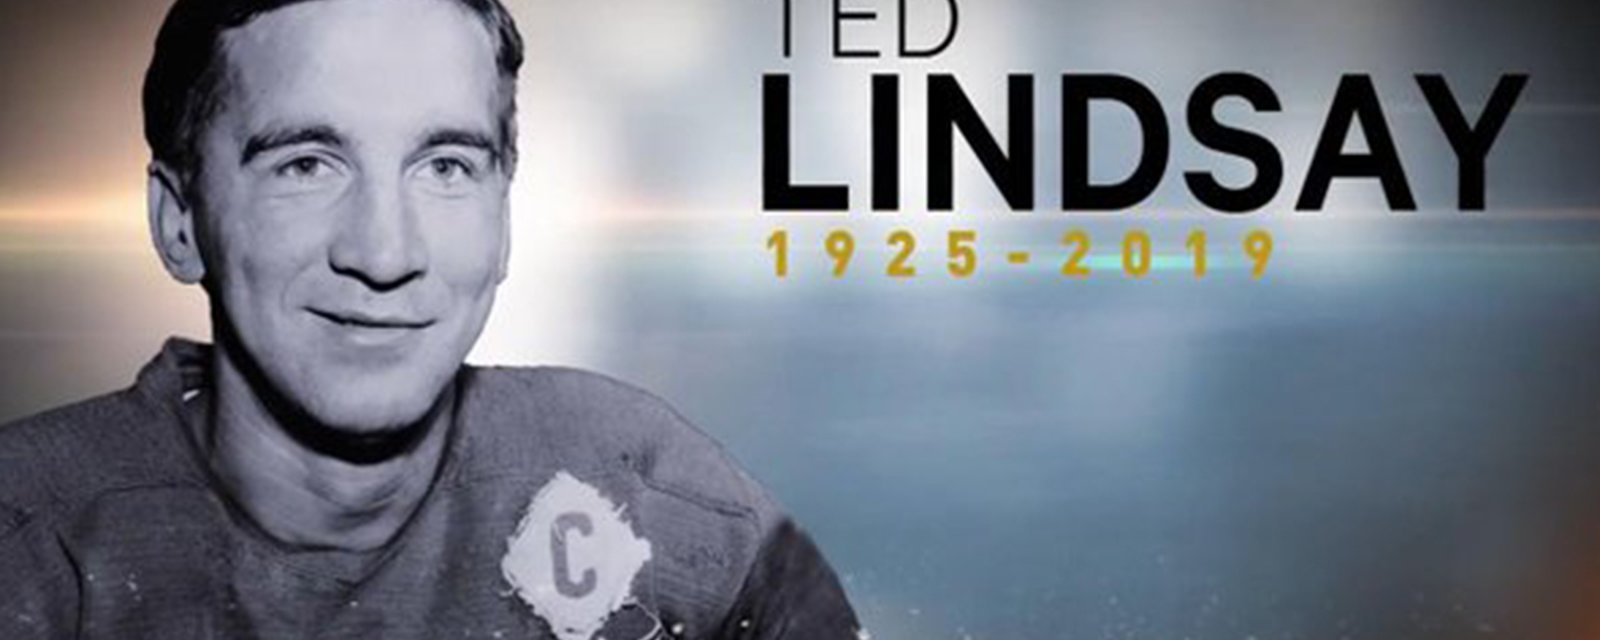 ICYMI: NHL legend and NHLPA pioneer Ted Lindsay dead at 93 years old